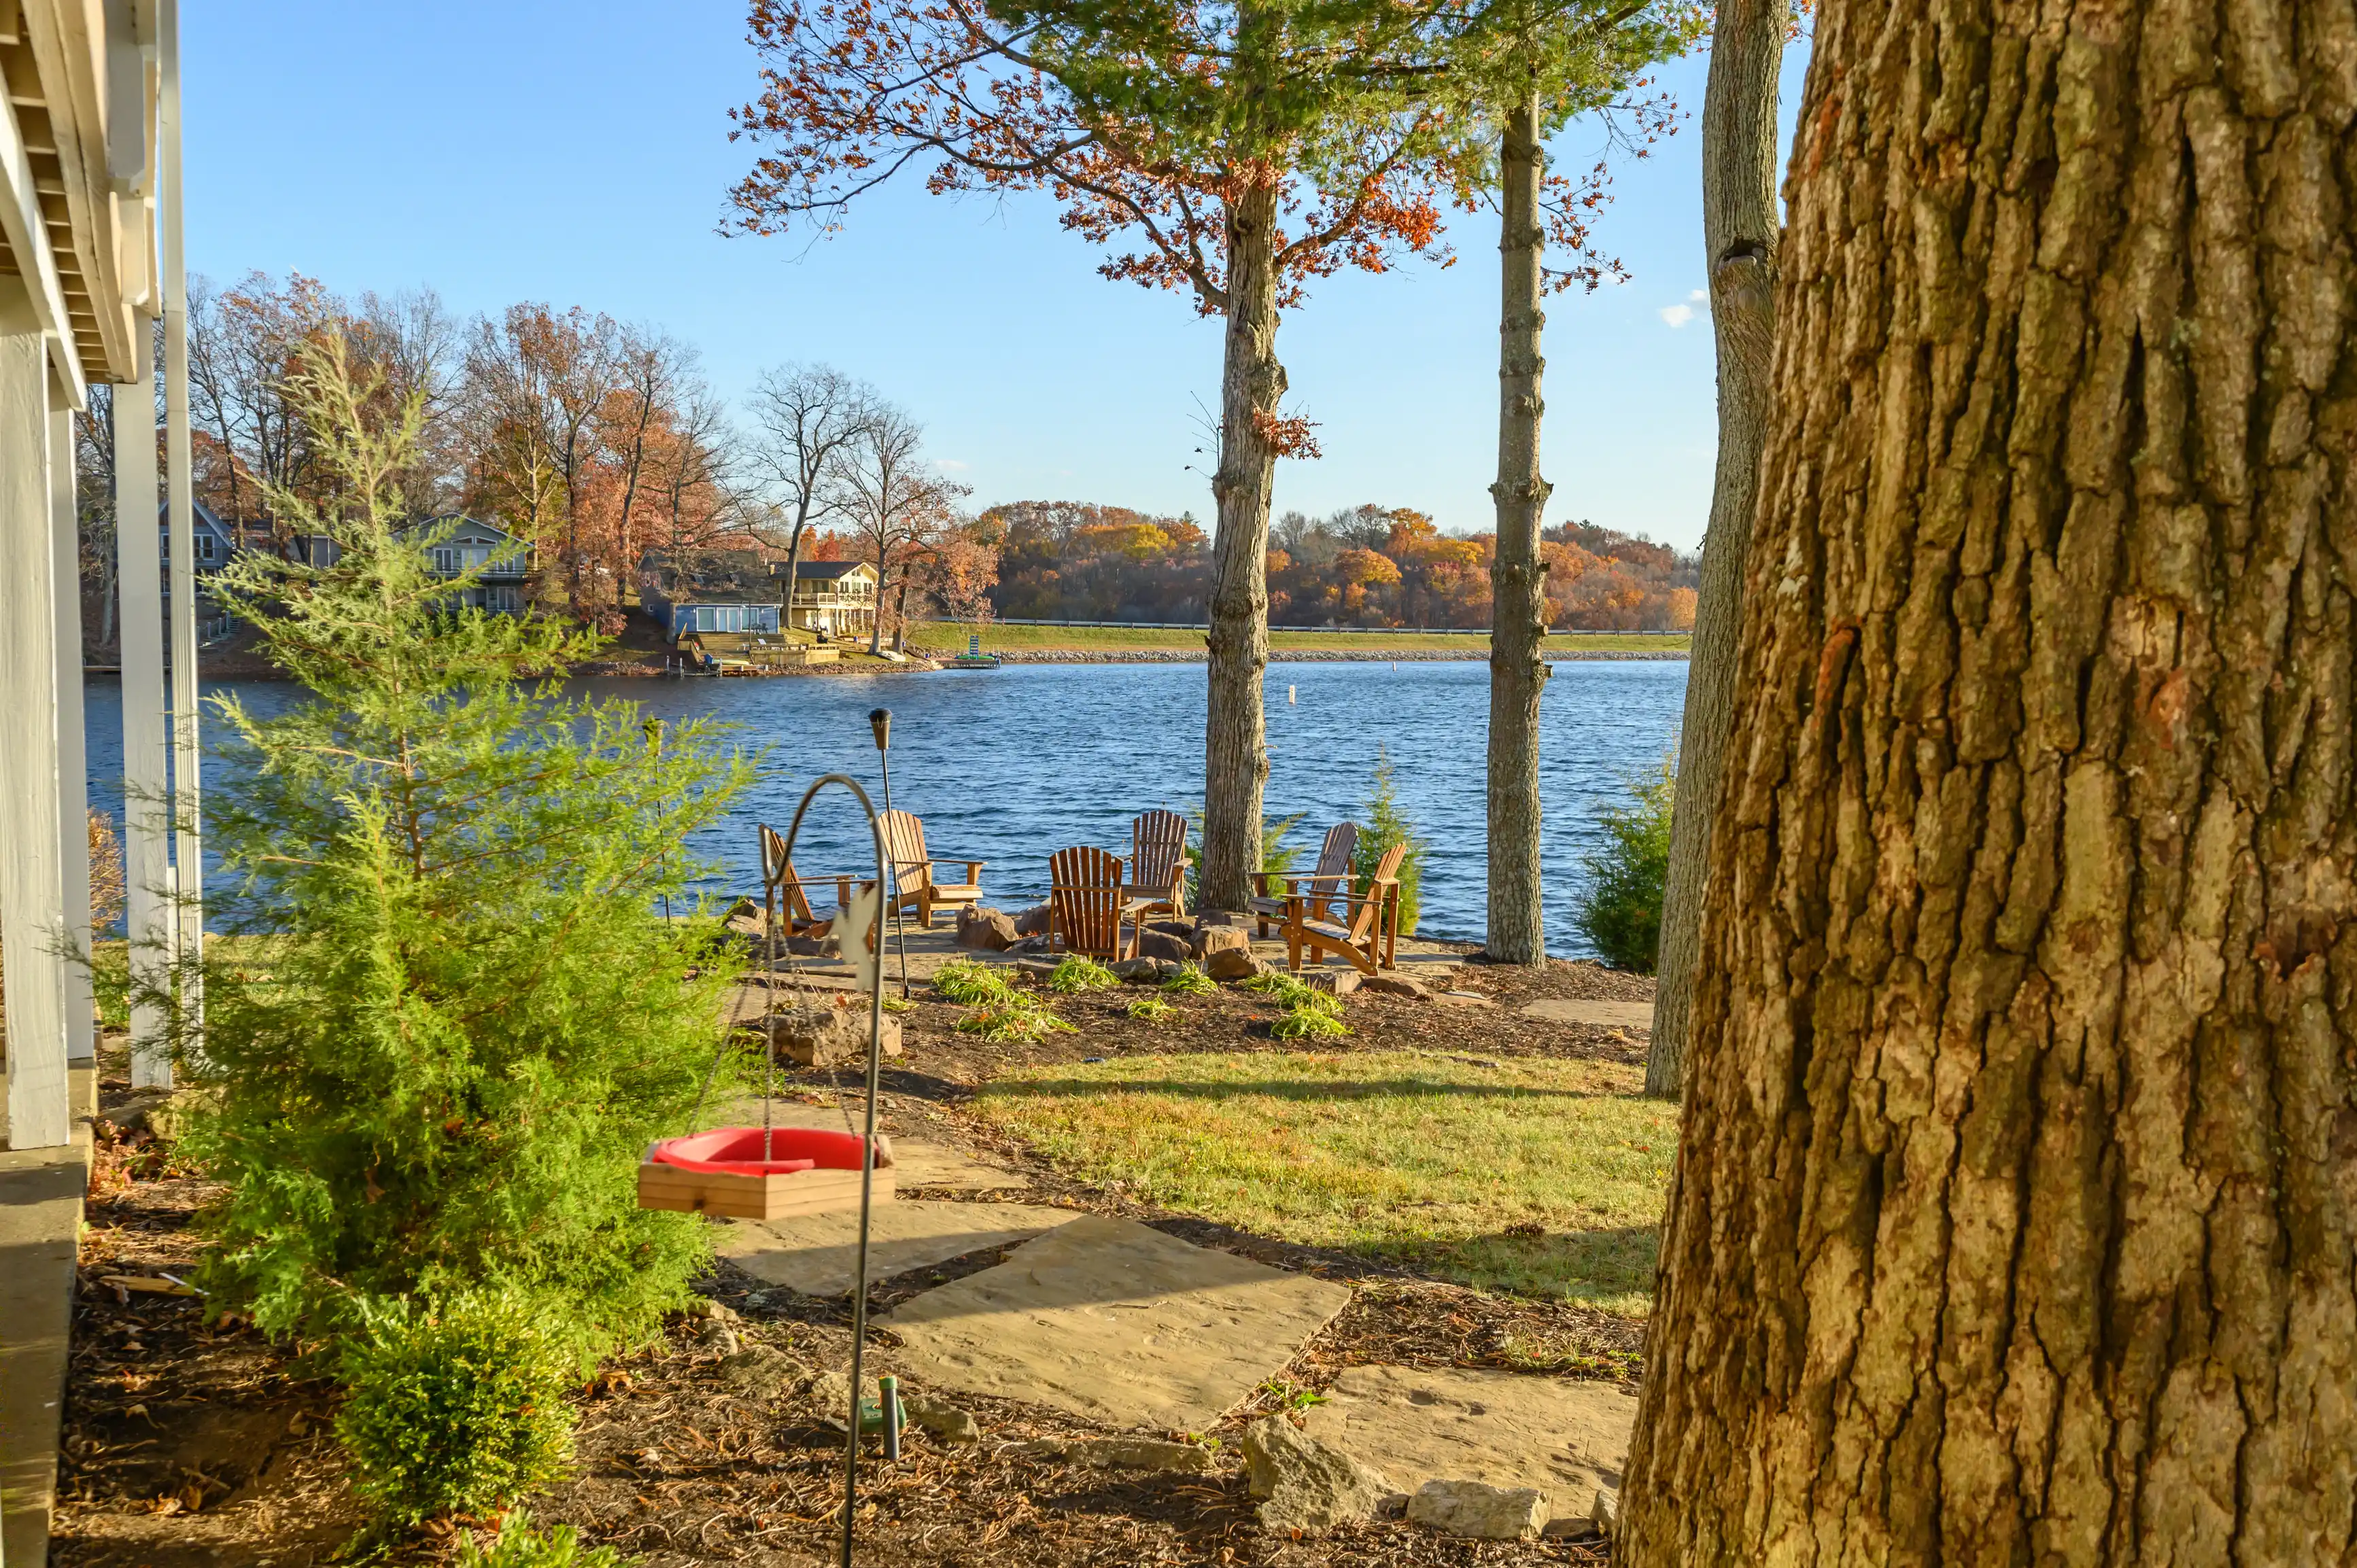 Tranquil lakeside backyard with Adirondack chairs, autumn trees, and a clear blue sky.